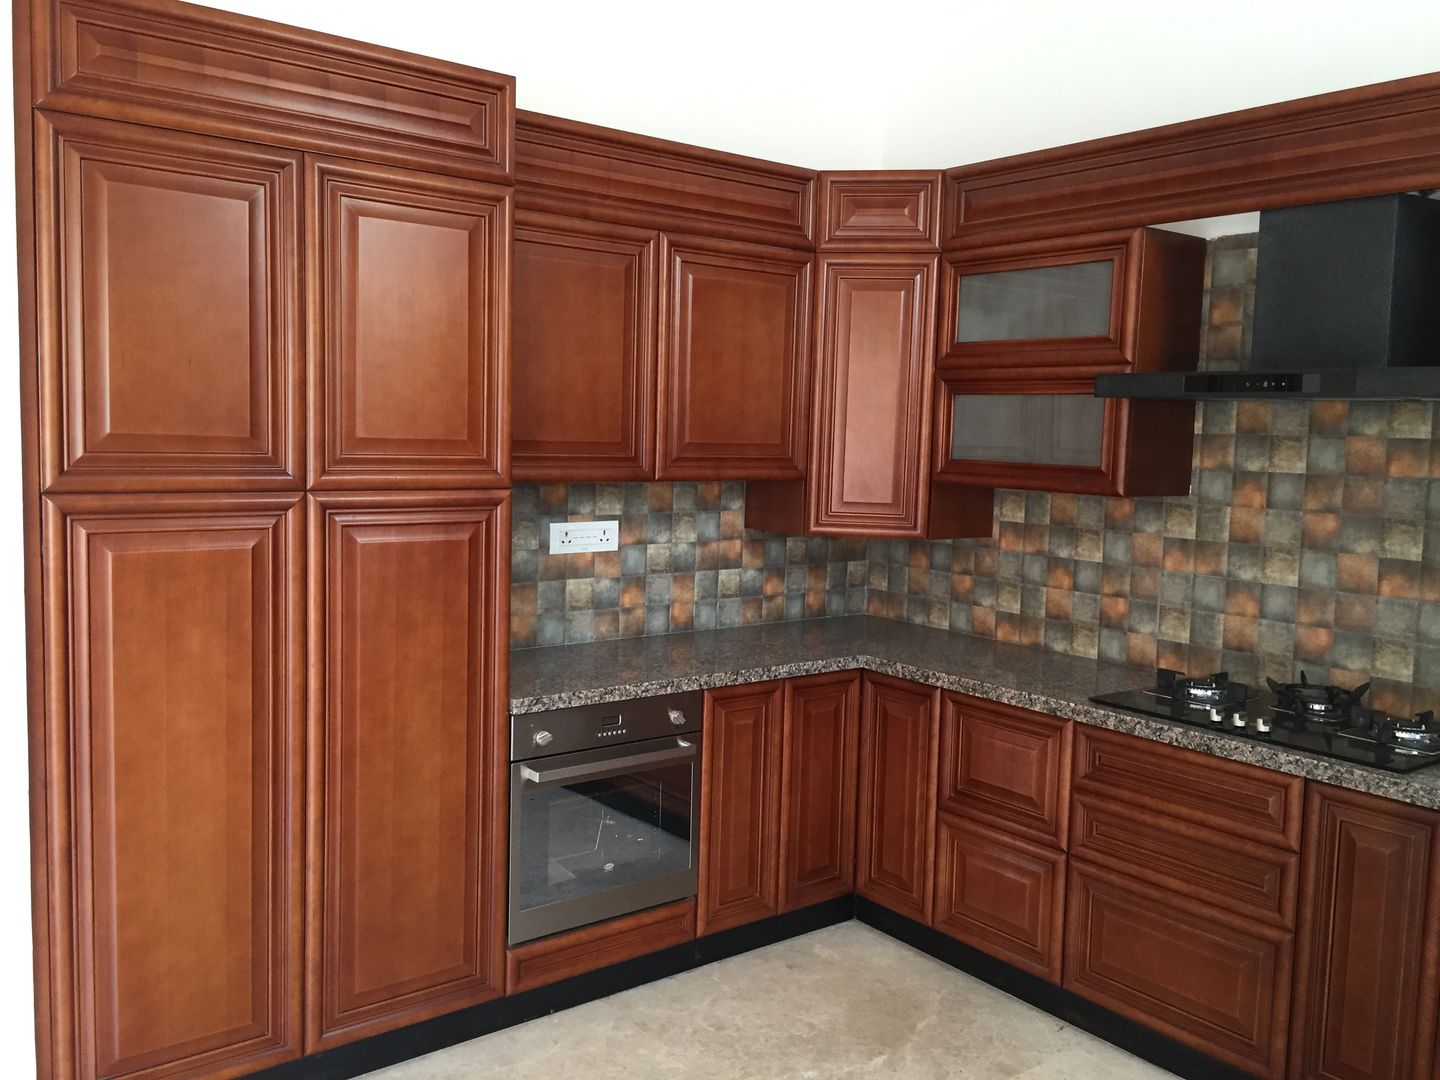 Wooden Kitchen Tall Cabinets Hoop Pine Interior Concepts Kitchen units Solid Wood Multicolored